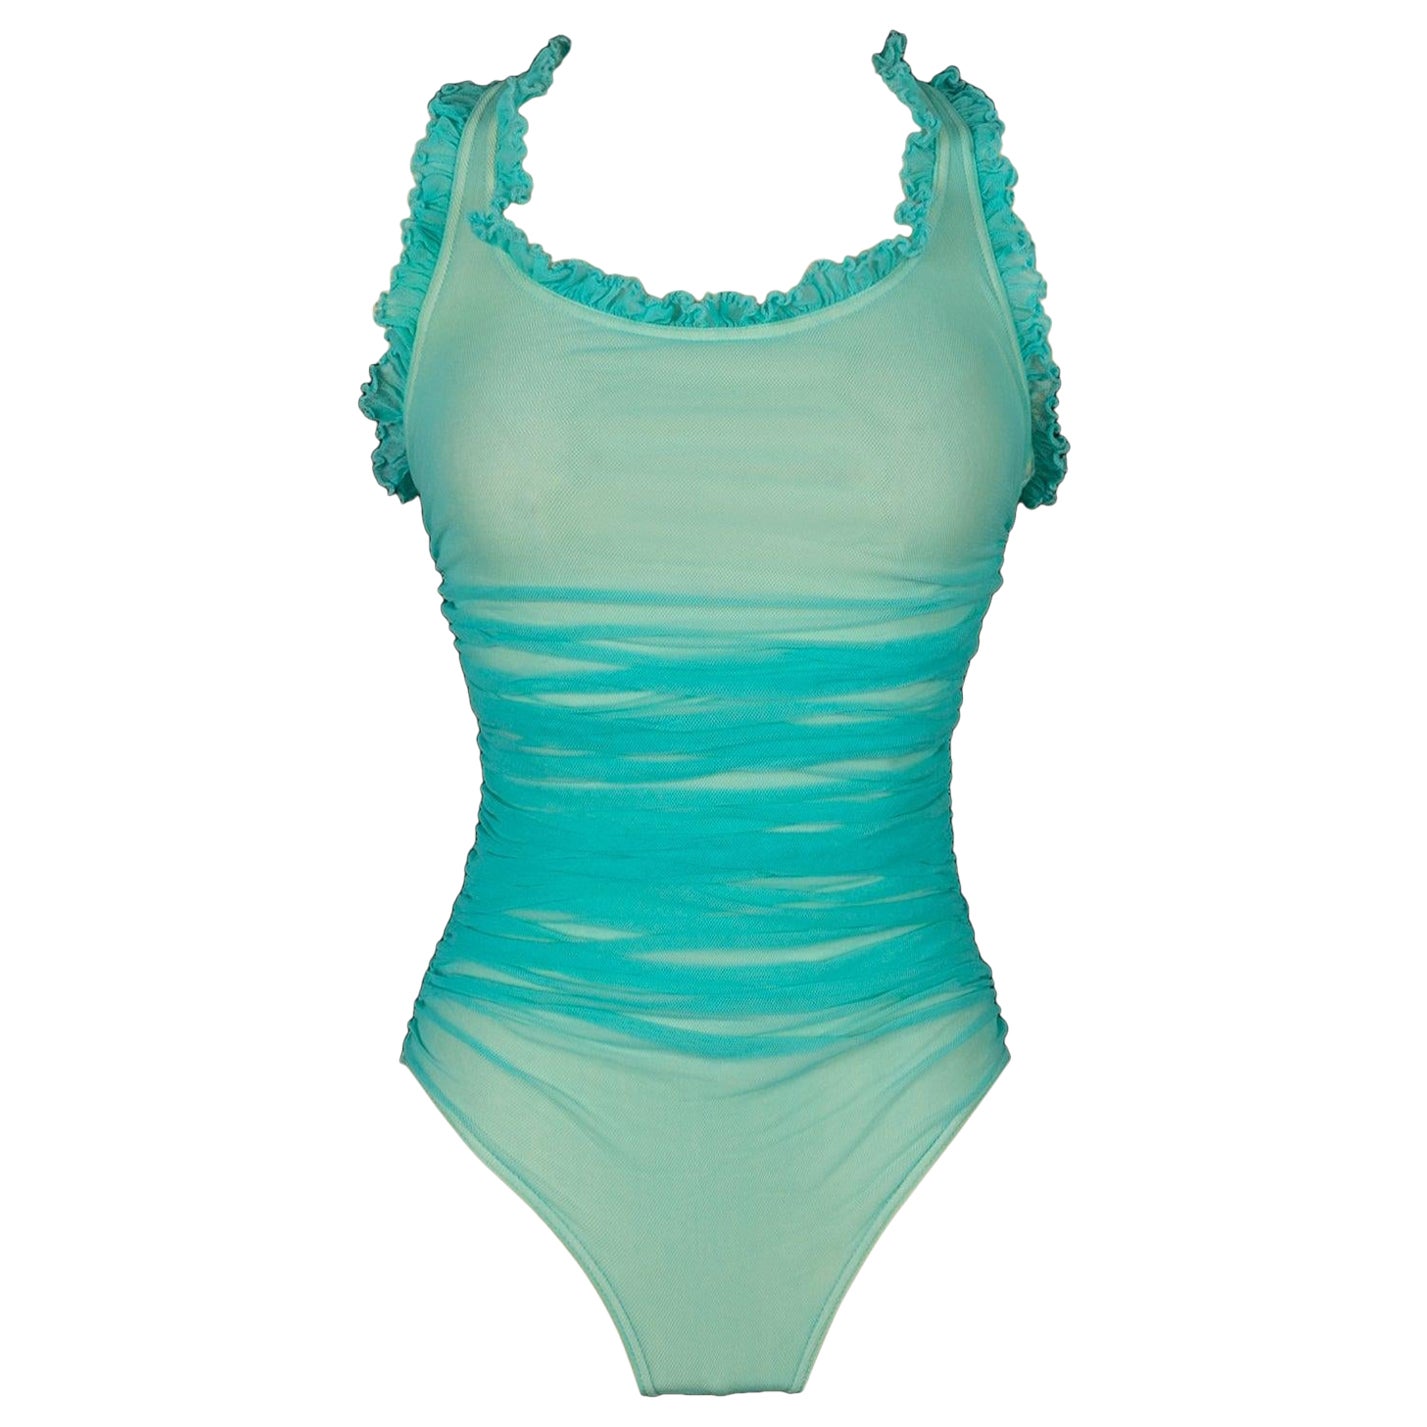 Chanel Turquoise Swimsuit / Bodysuit, 2001 For Sale